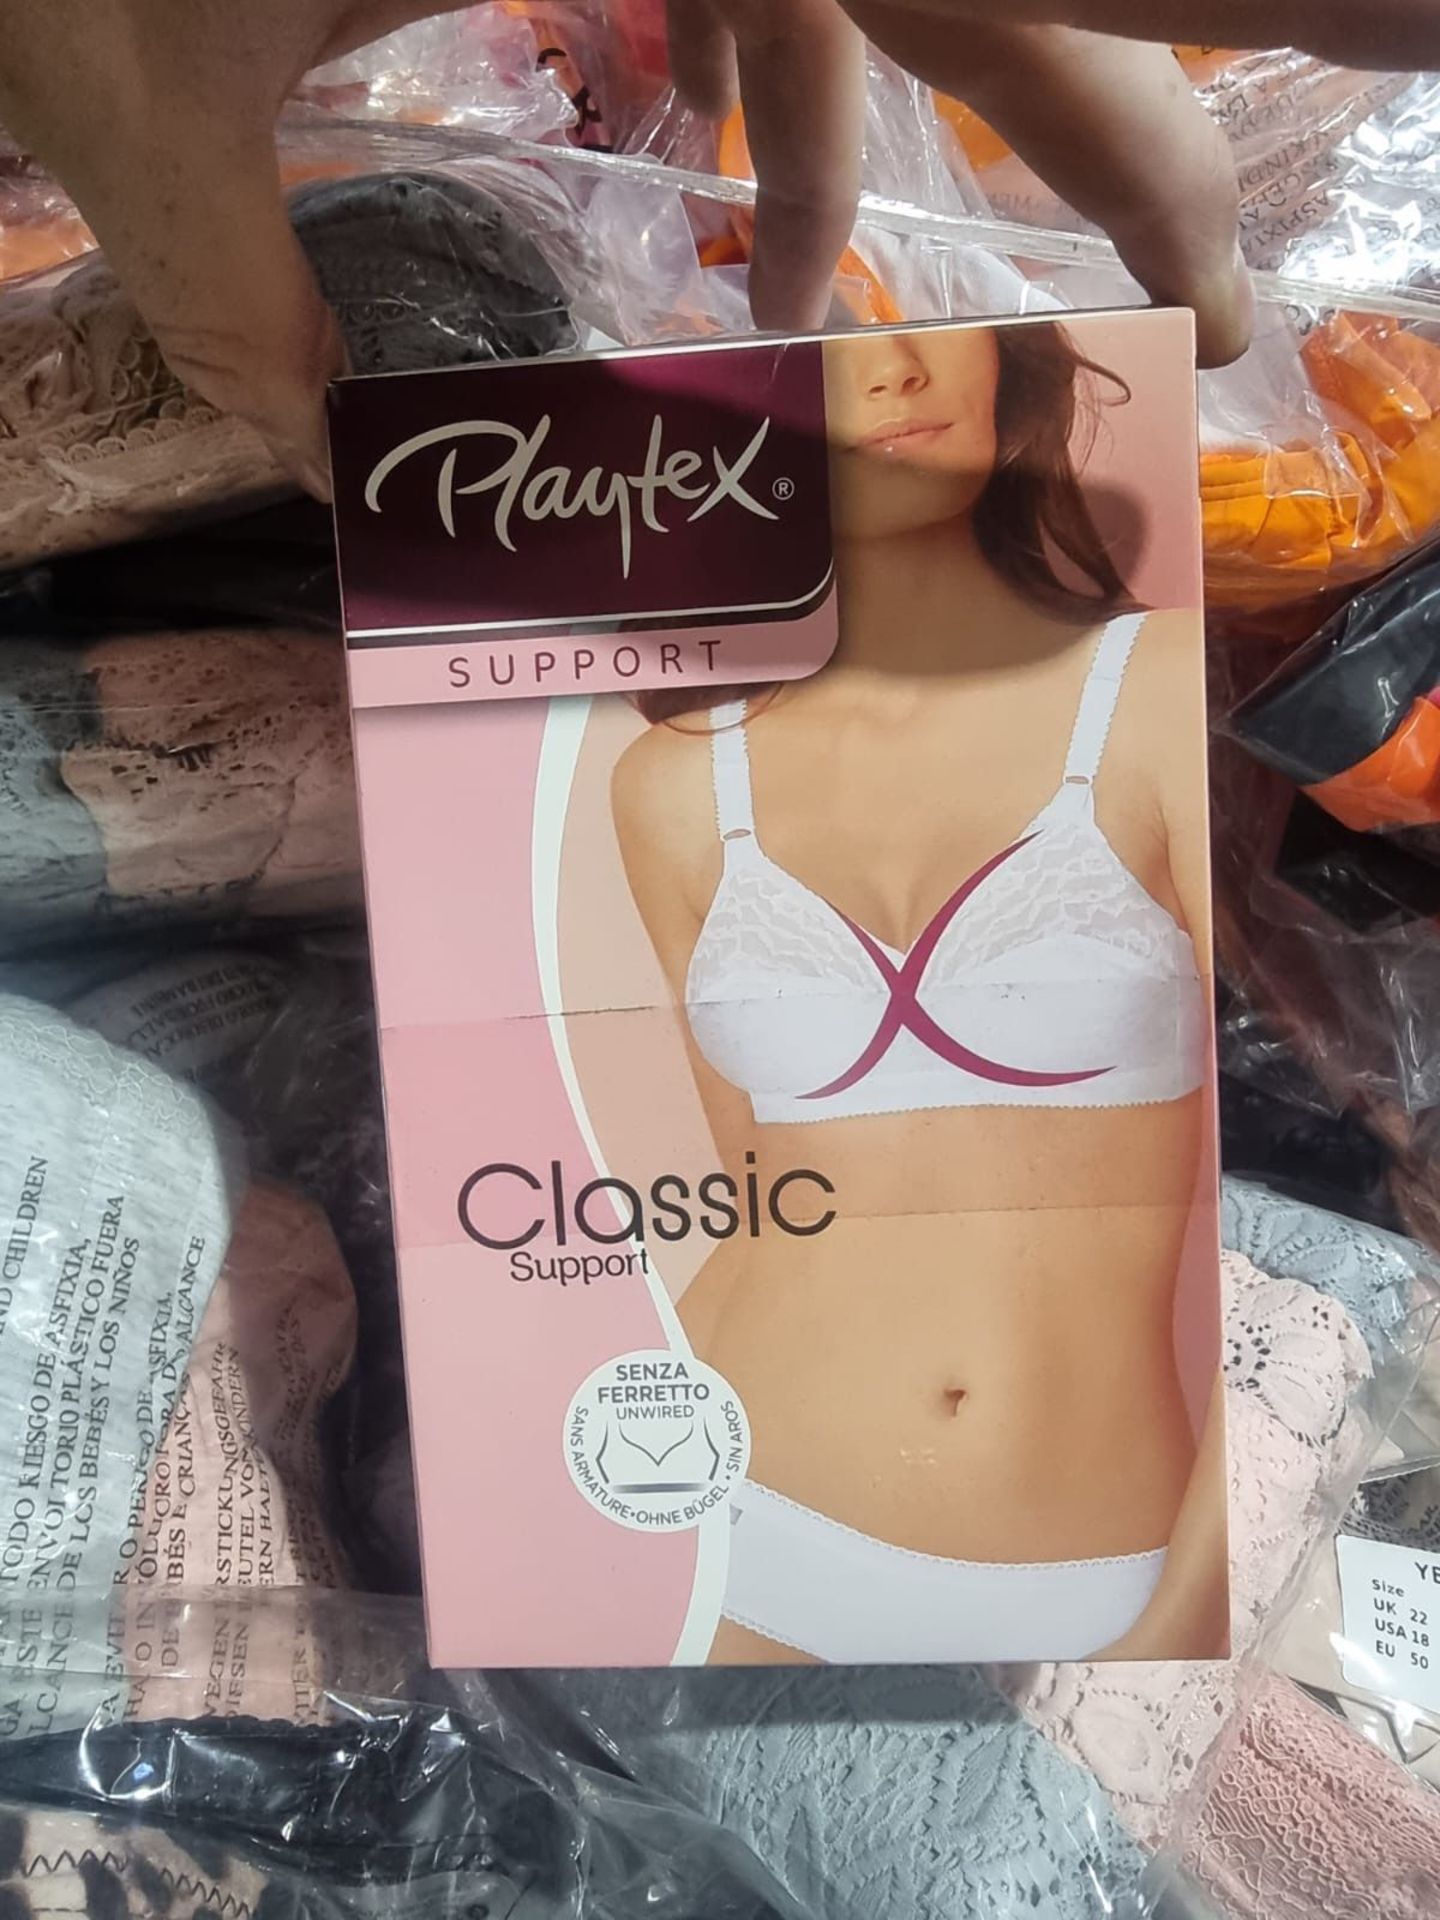 100 x NEW PACKAGED ASSORTED SWIM & UNDERWEAR FROM BRAND SUCH AS WONDERBRA, BOUX AVENUE, ANN SUMMERS, - Image 33 of 53